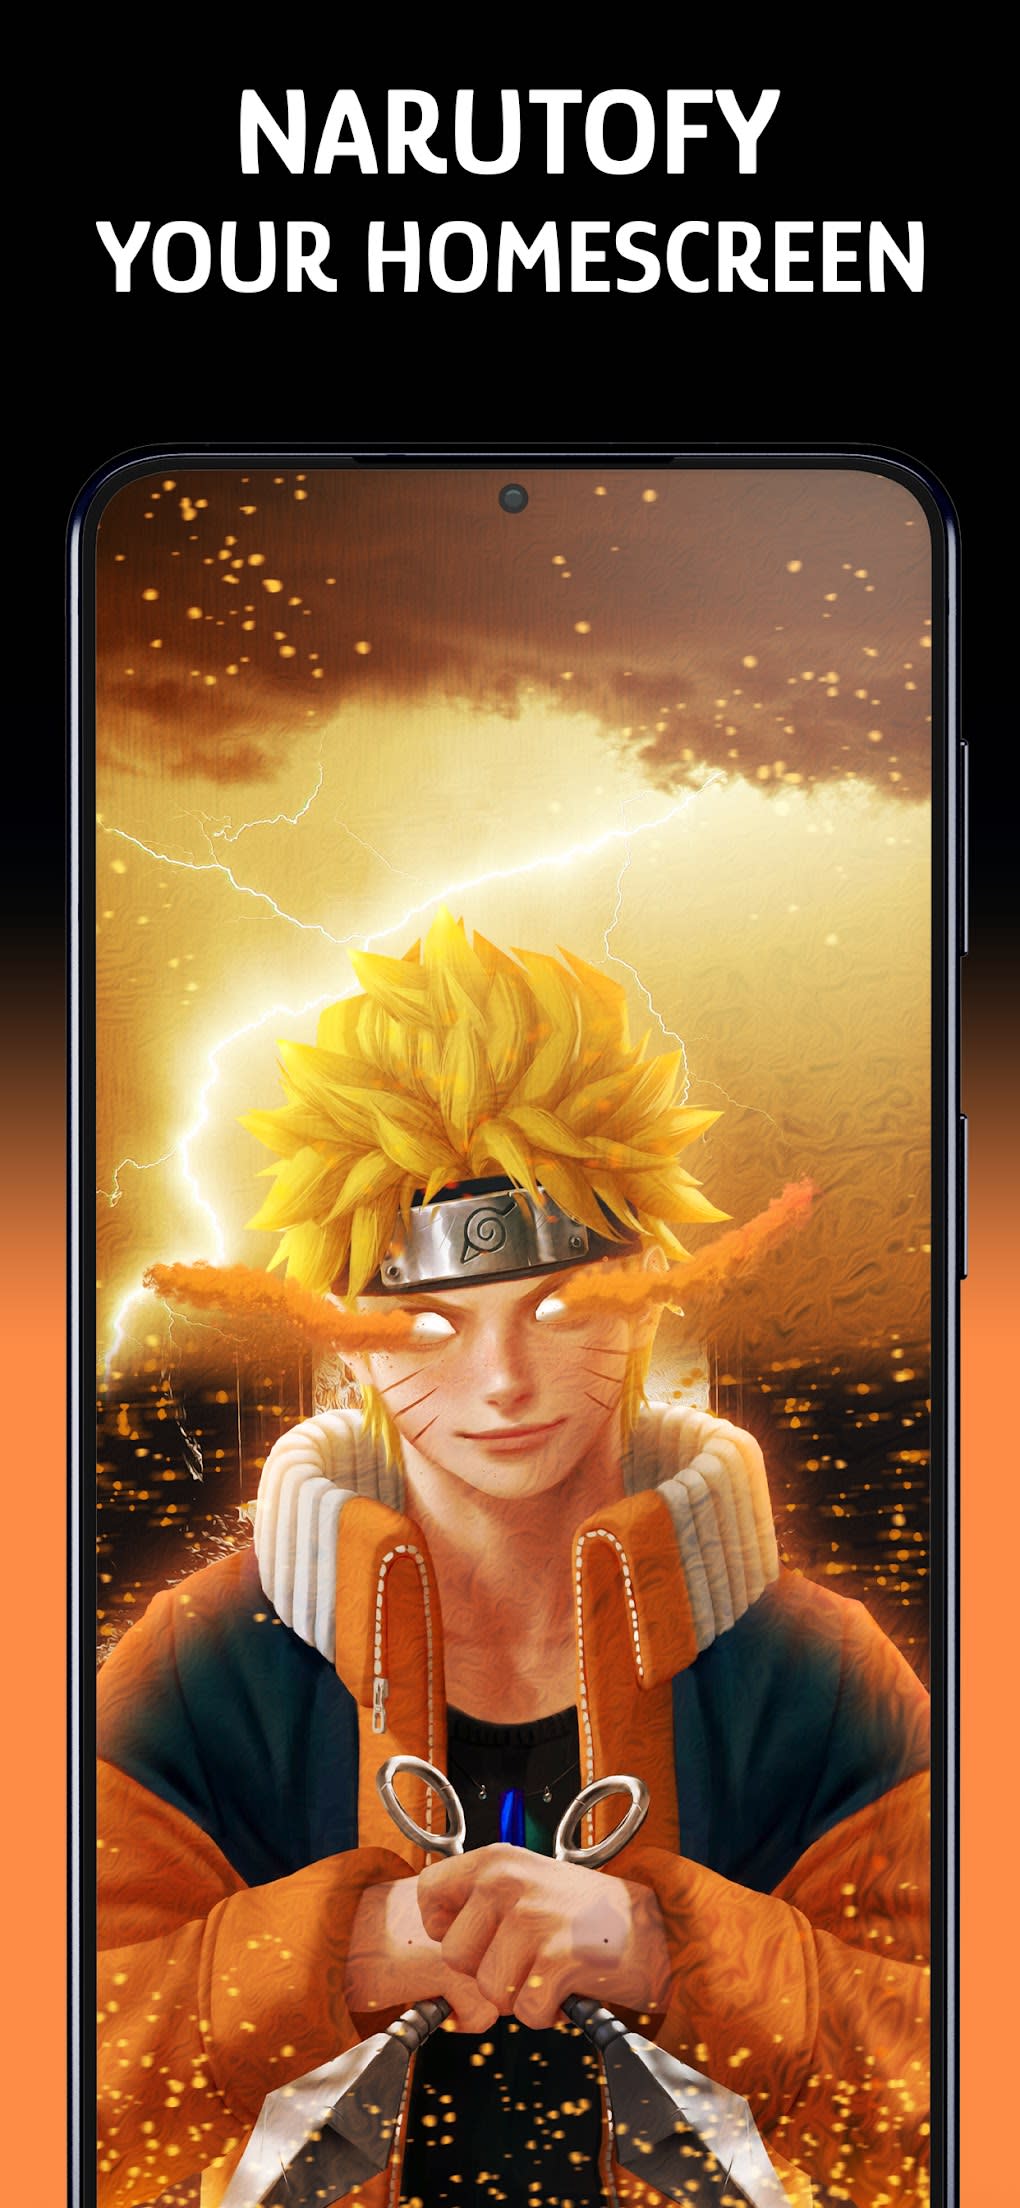 Naruto Live Wallpaper For PC 55 images